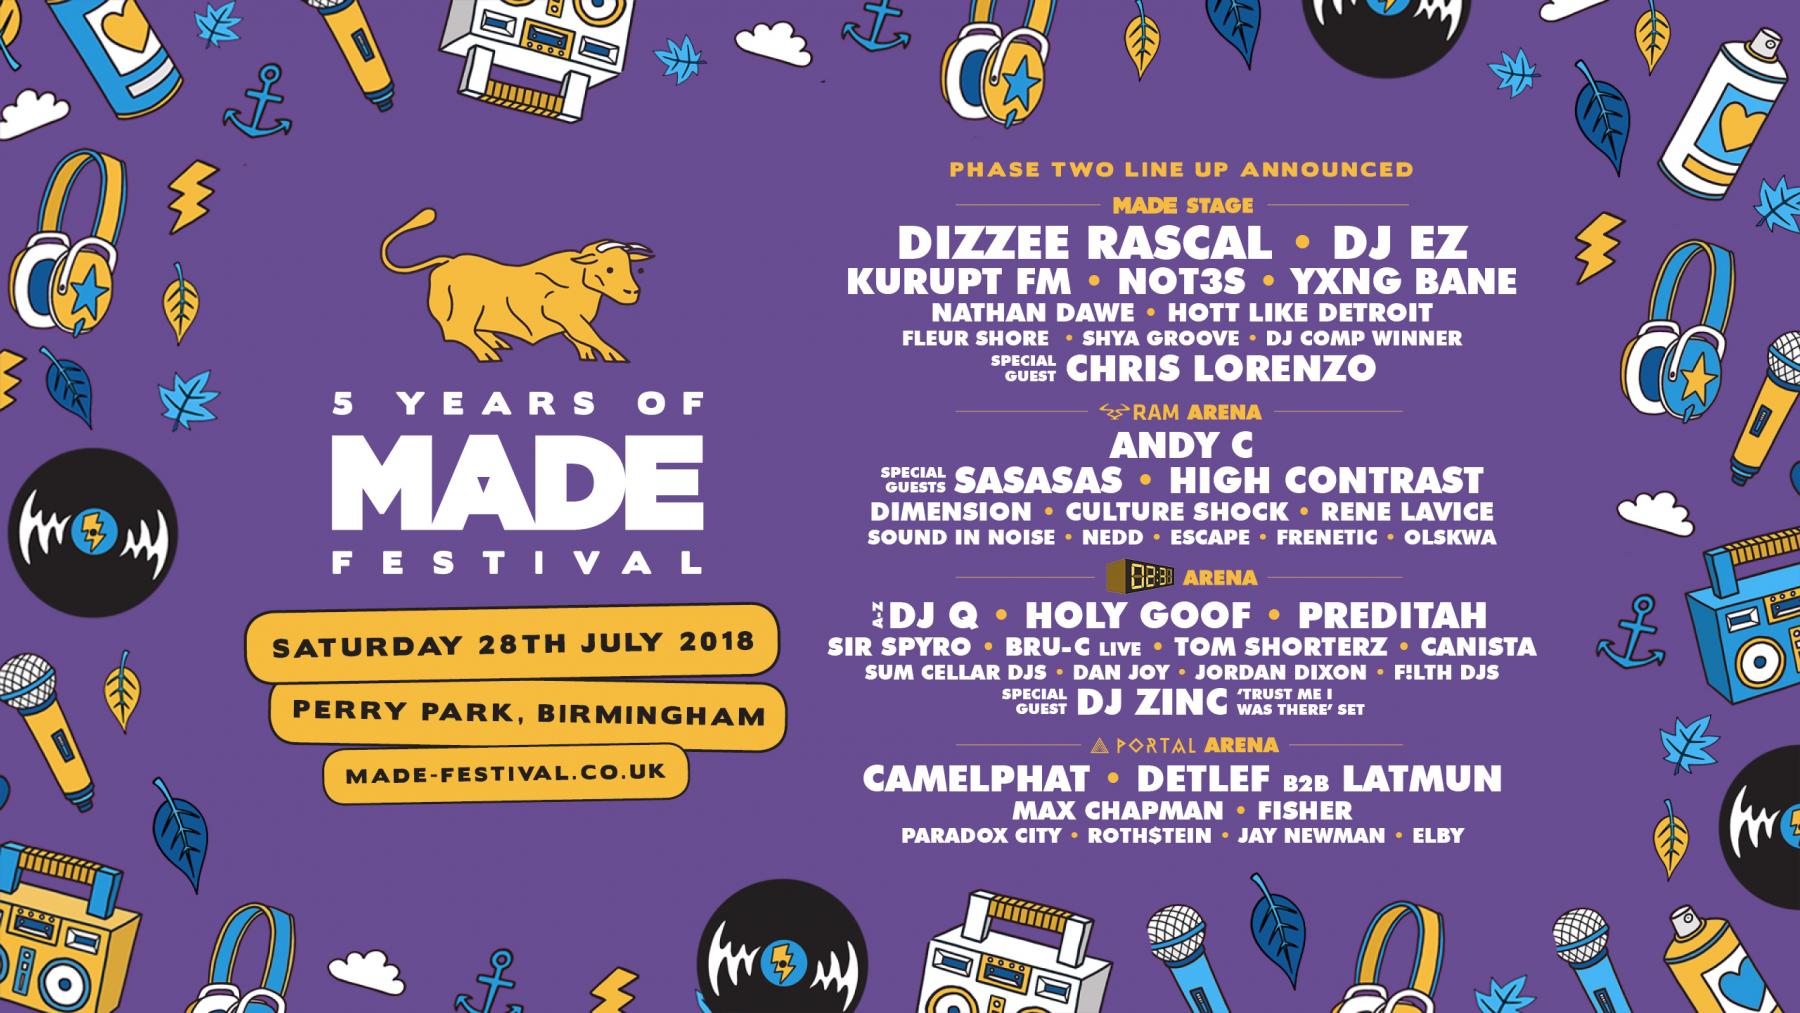 MADE Festival 2018: Second Line Up Announcement! 